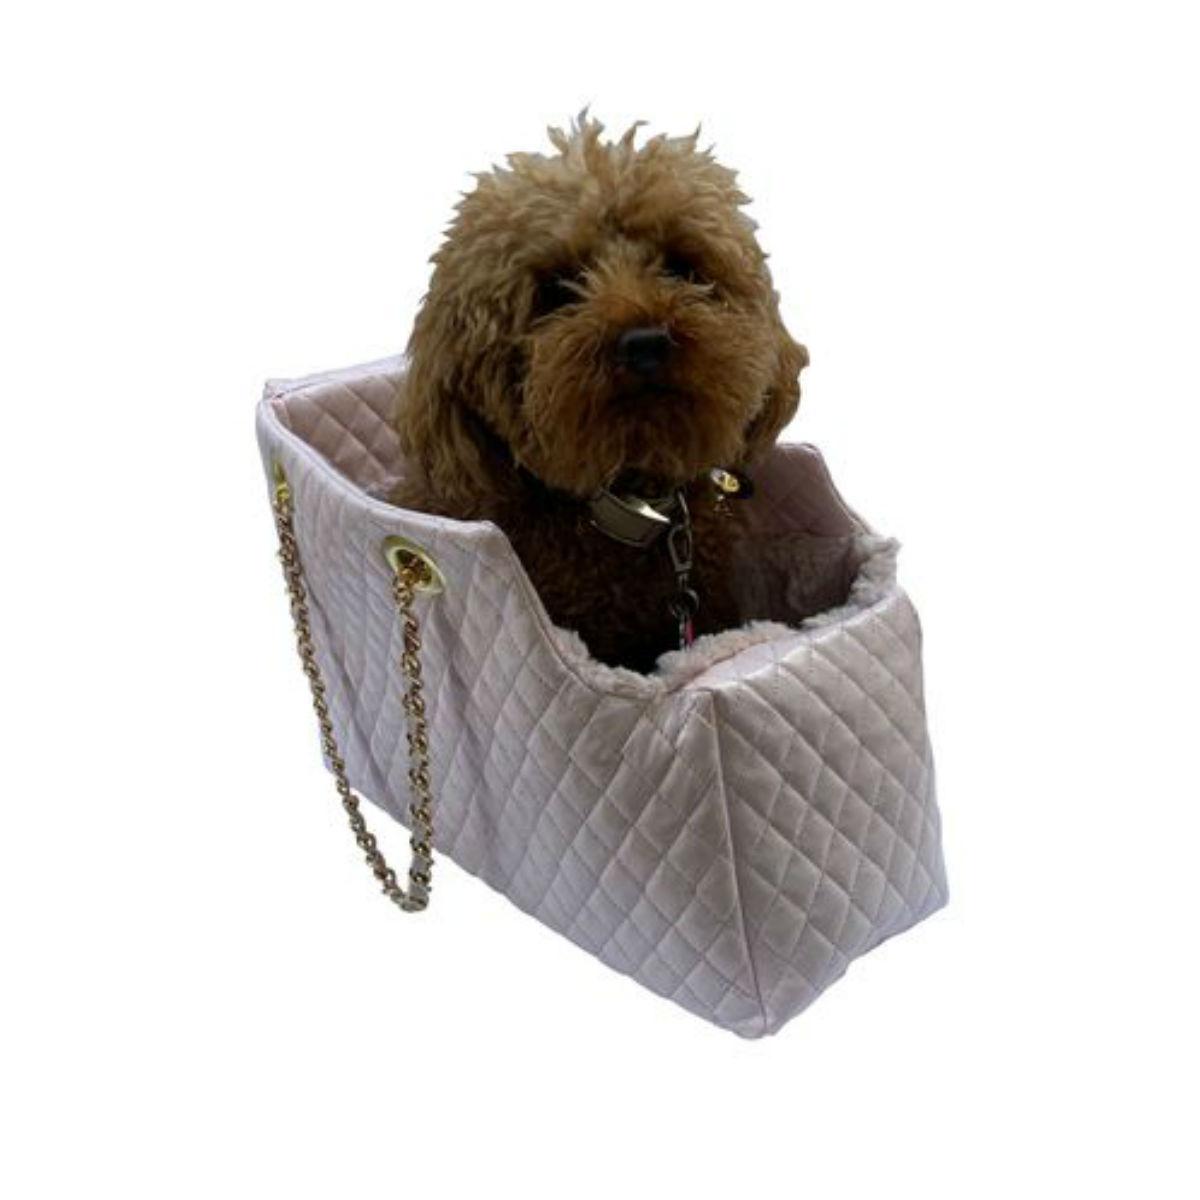 Pearl Pink Quilted Faux Leather Dog Carrier